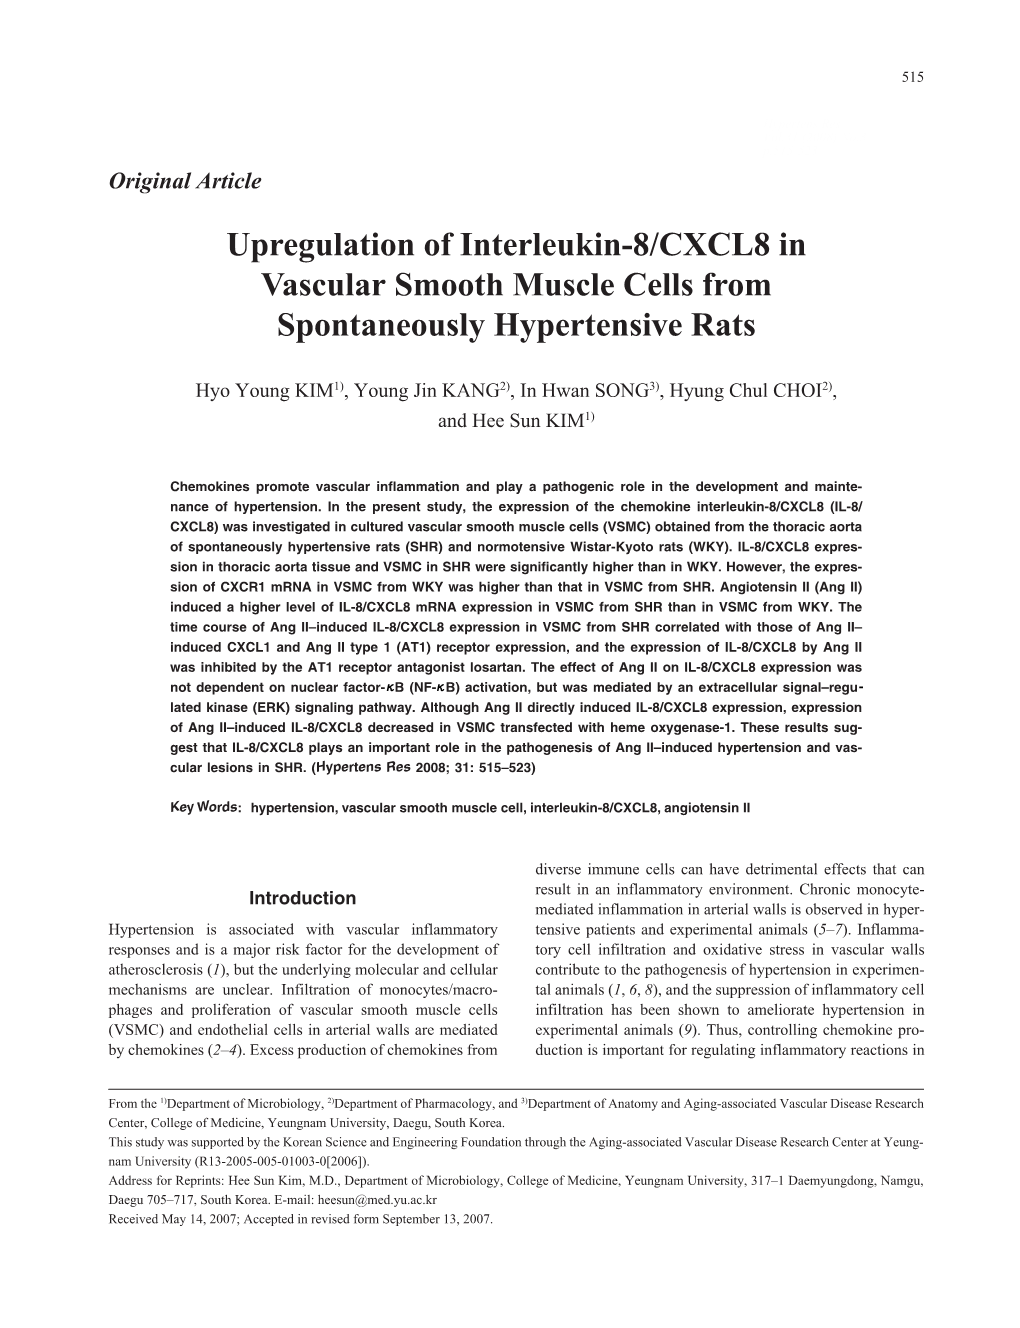 Upregulation of Interleukin-8/CXCL8 in Vascular Smooth Muscle Cells from Spontaneously Hypertensive Rats